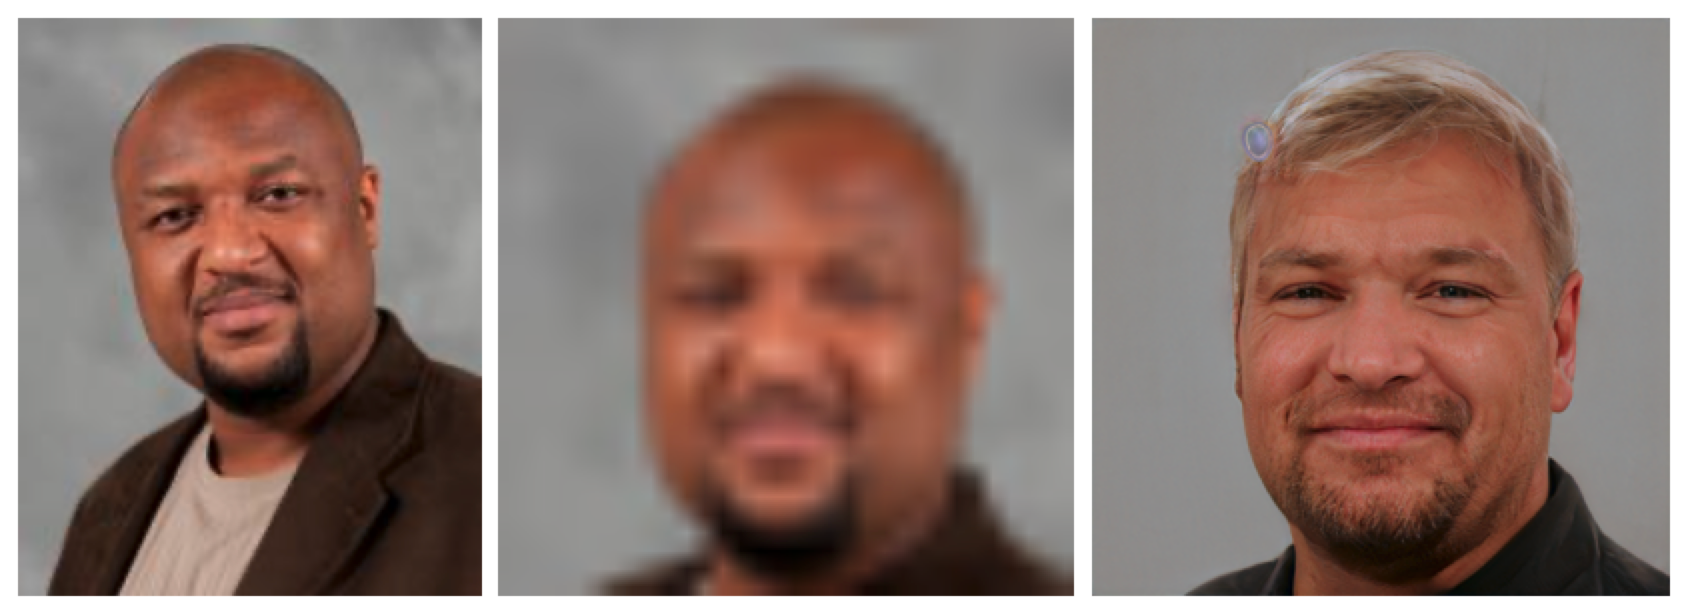 A triptych in which a Black is shown in a portrait, his face his then blurred, and he re-emerges a white man.